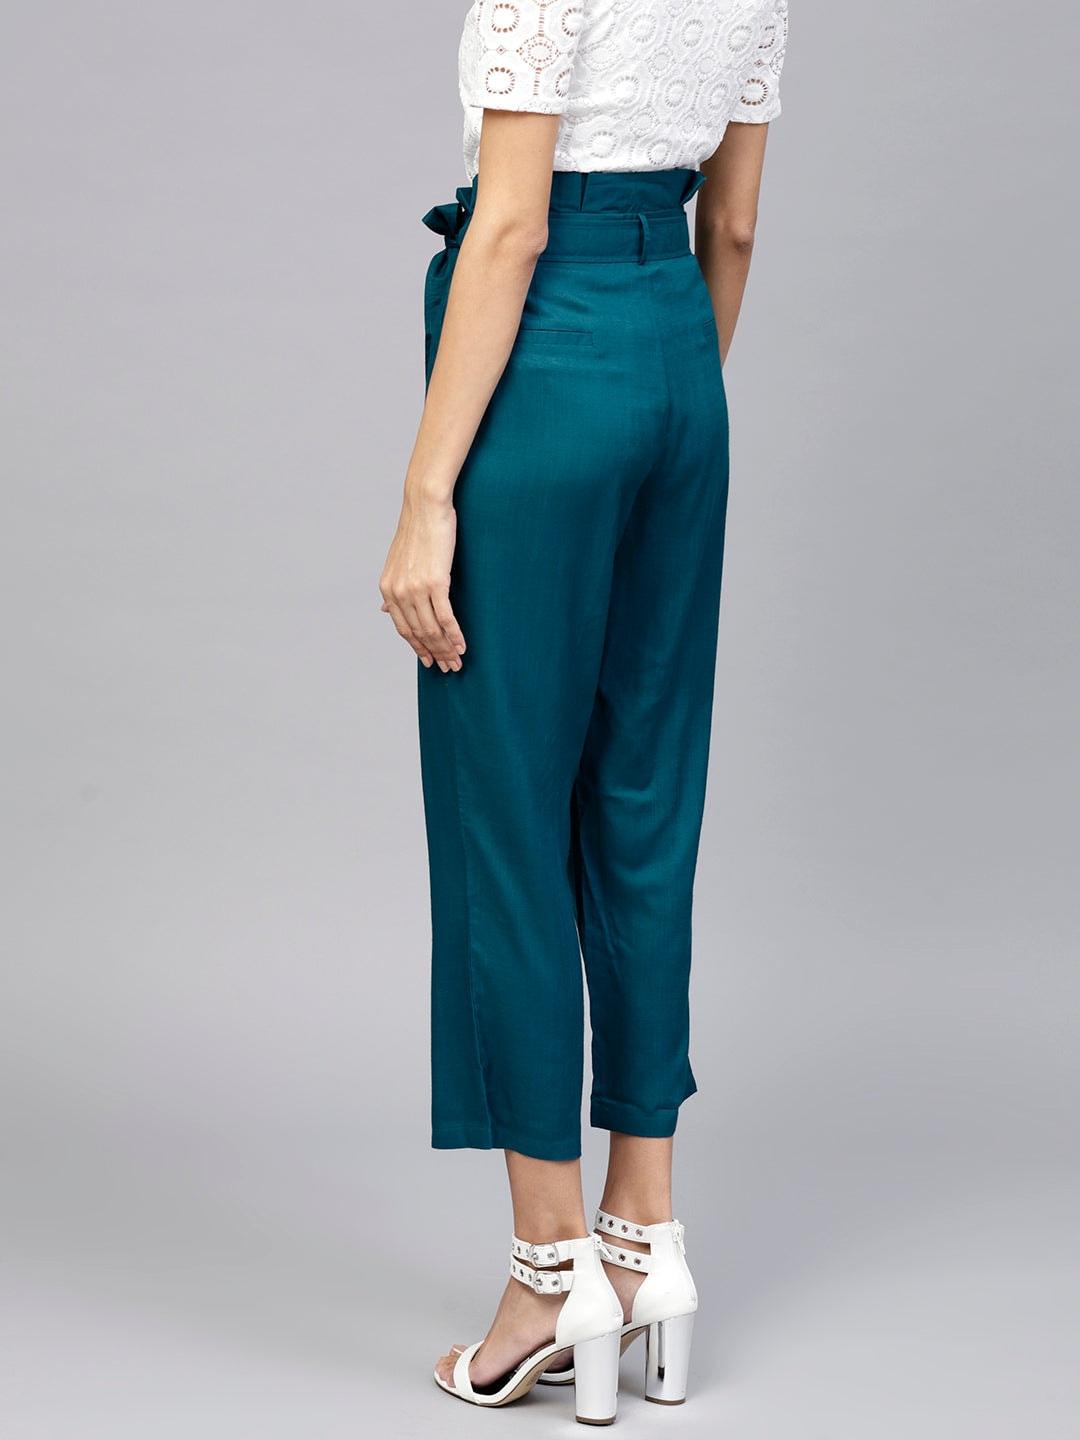 Blue Solid Rayon Trousers